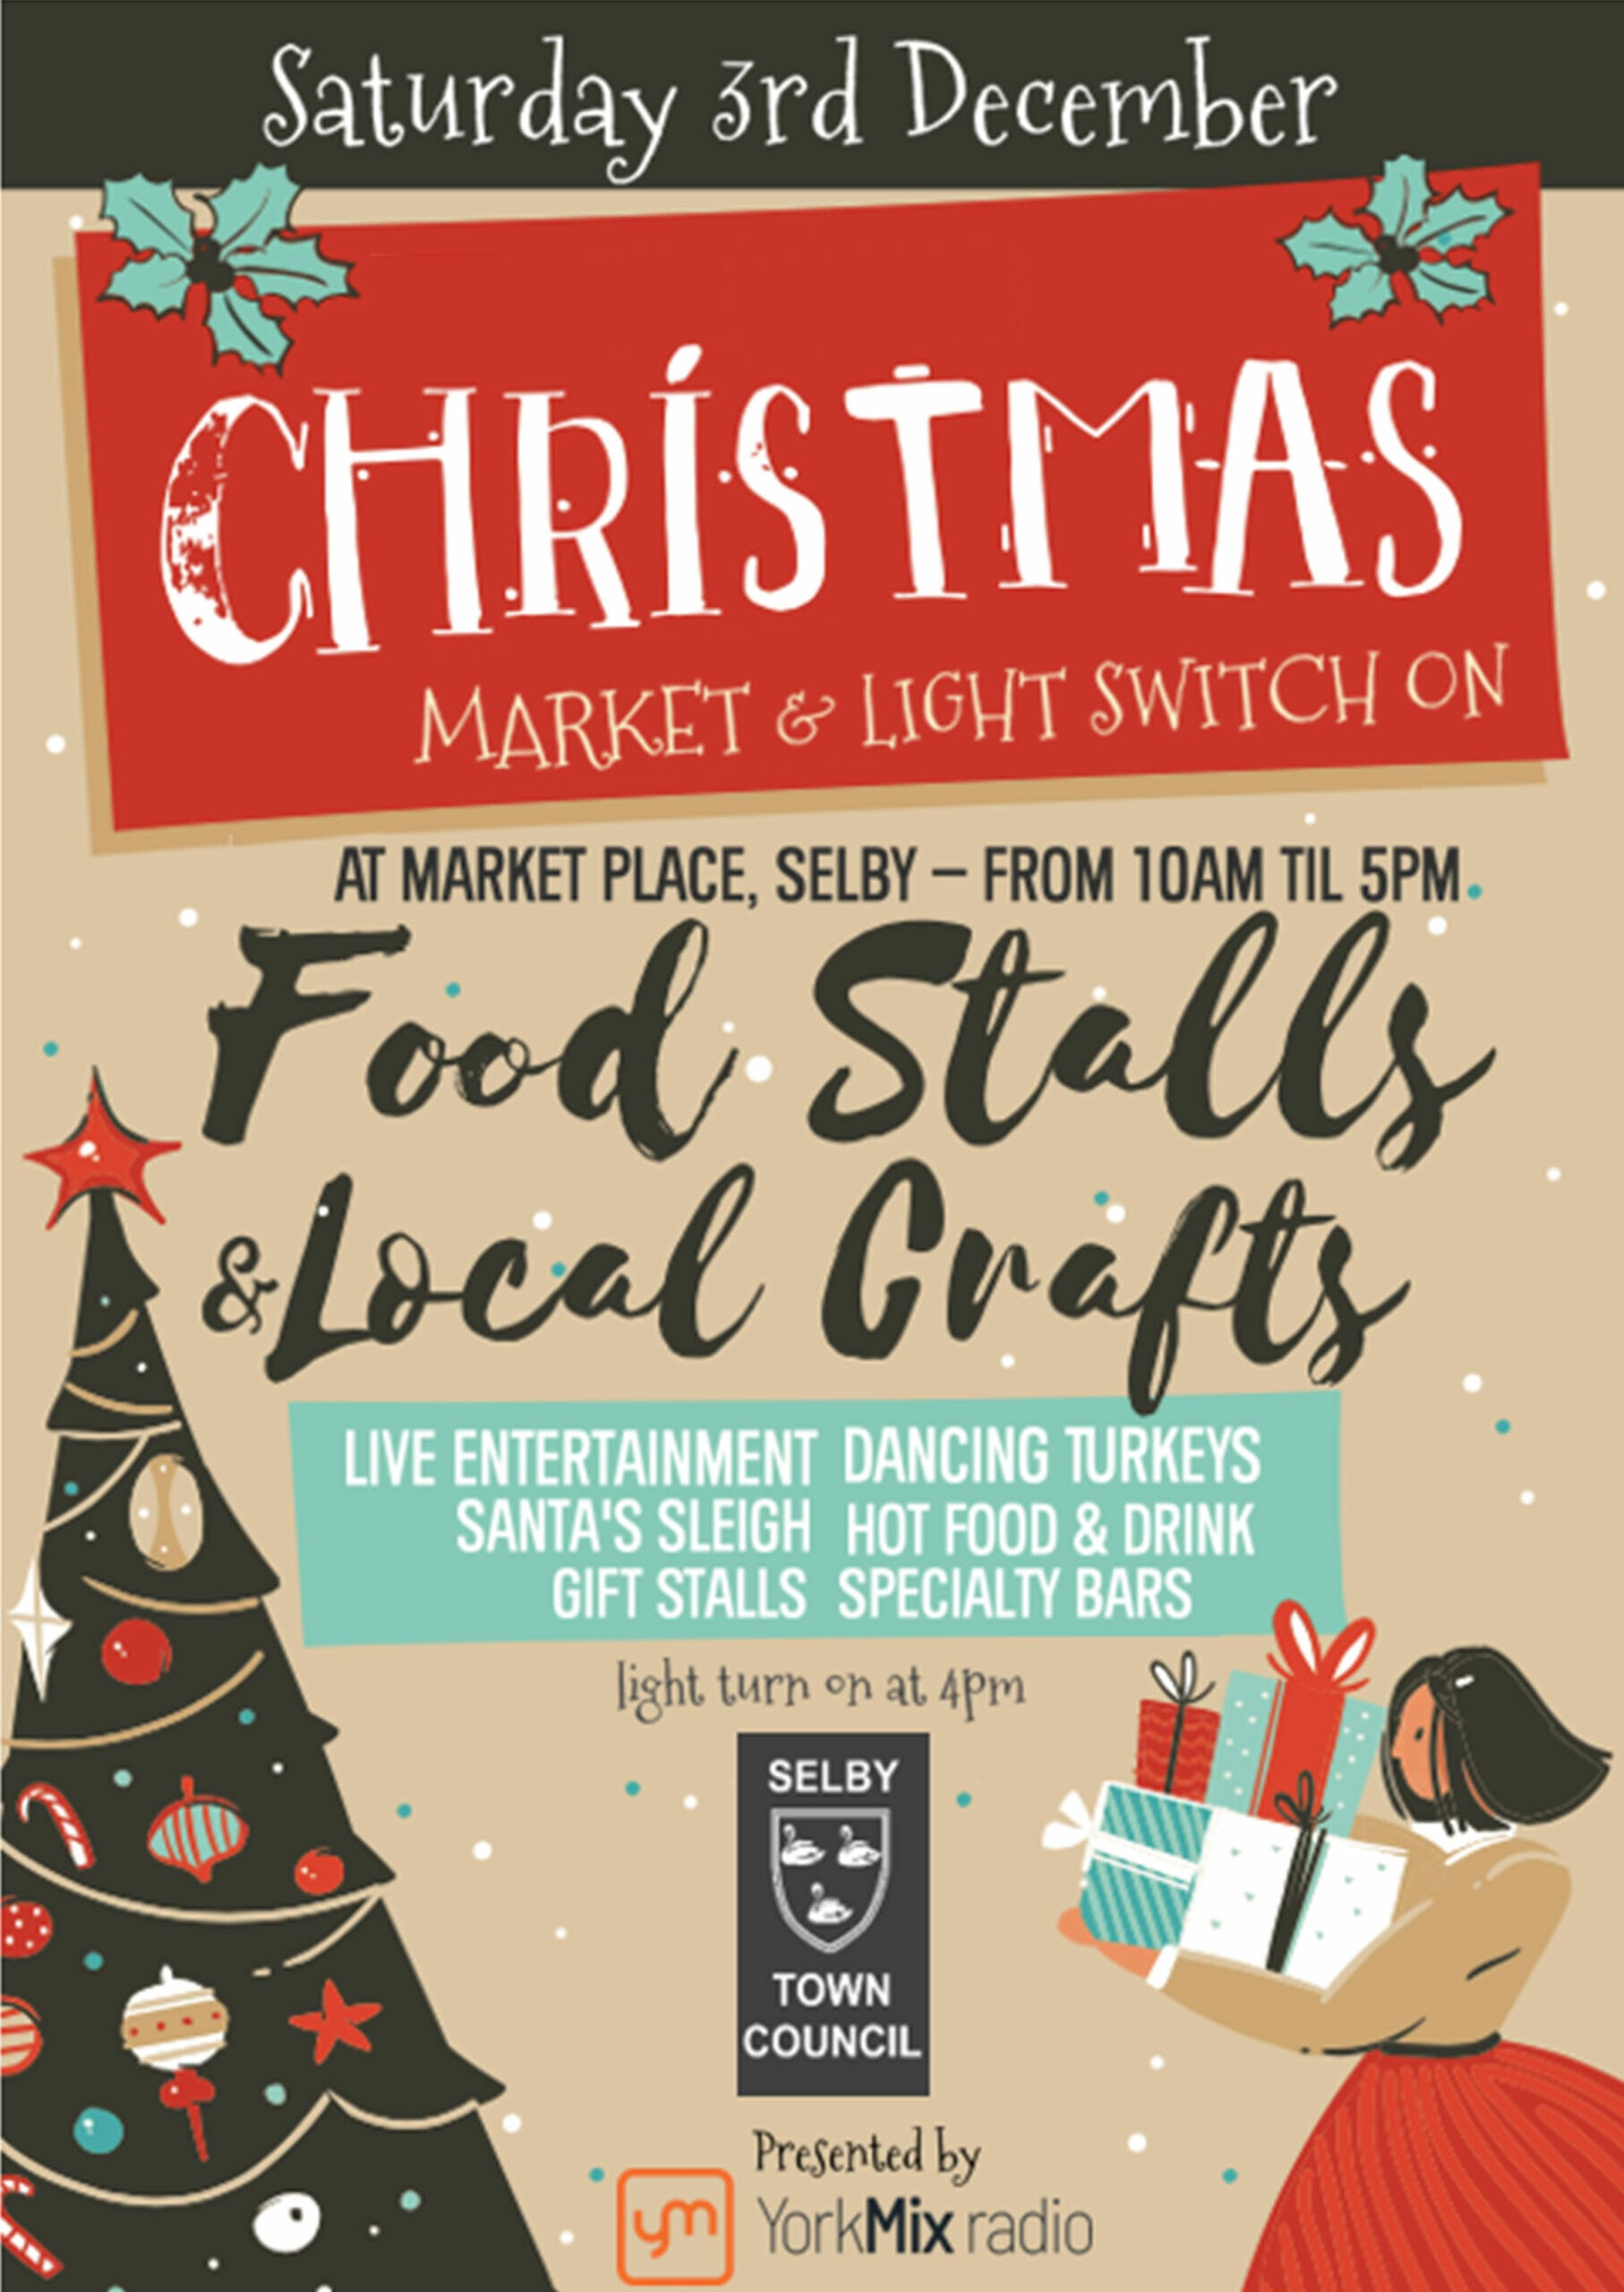 Selby’s Christmas Market & Light Switch On